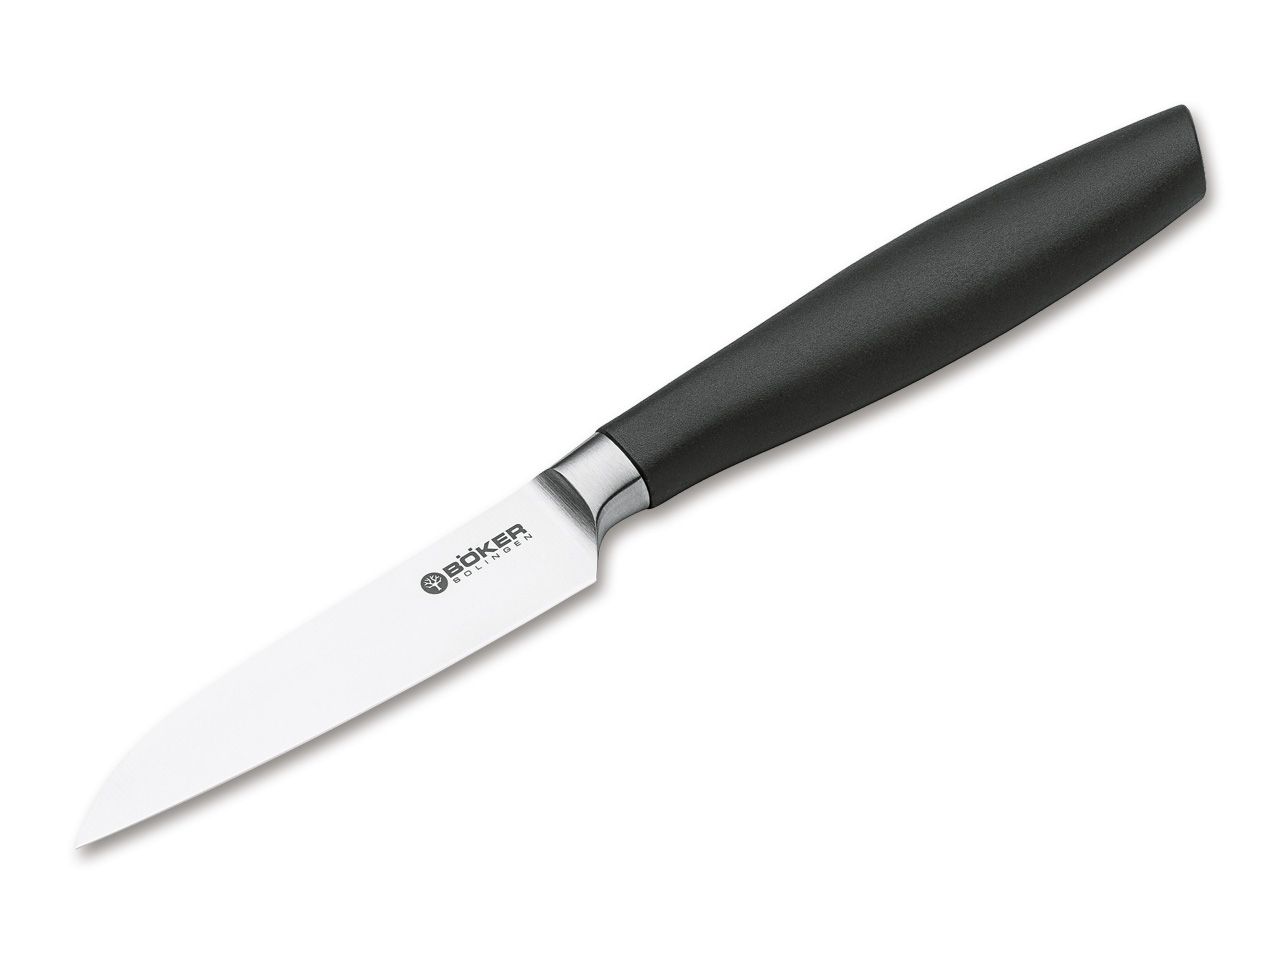 Core Professional Vegetable Knife